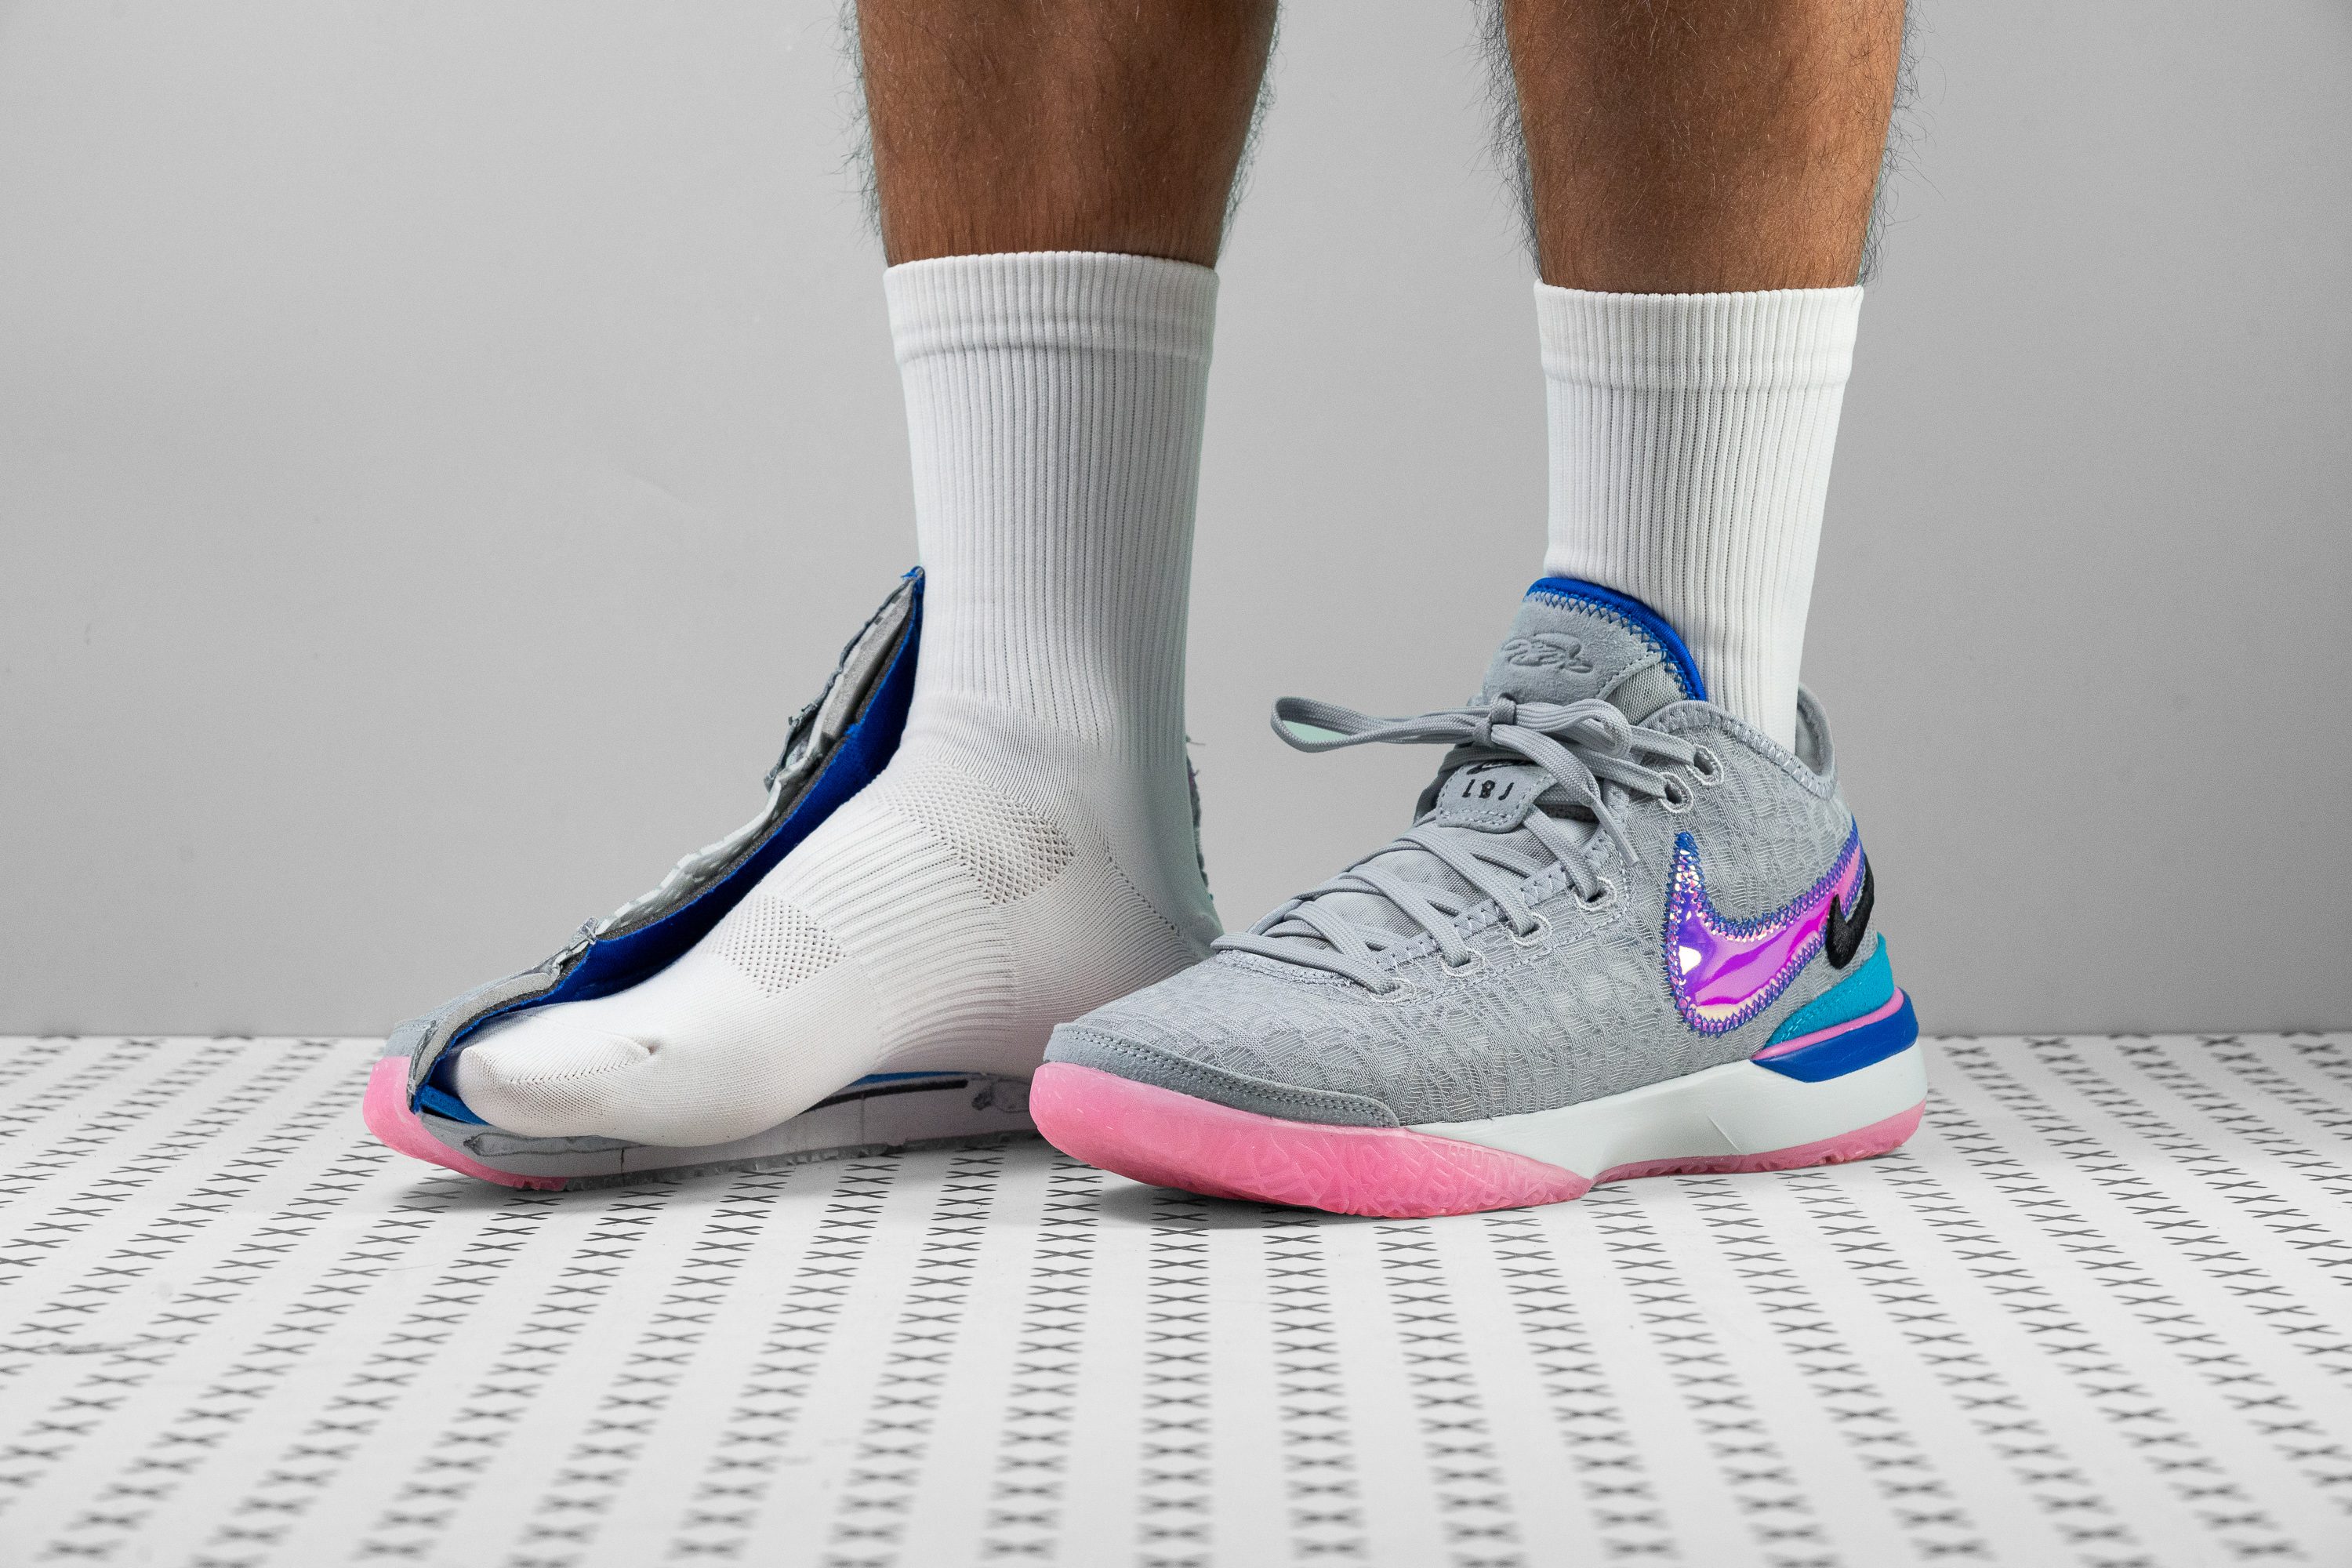 Cut in half: Nike nike kobe mentality on feet images funny face